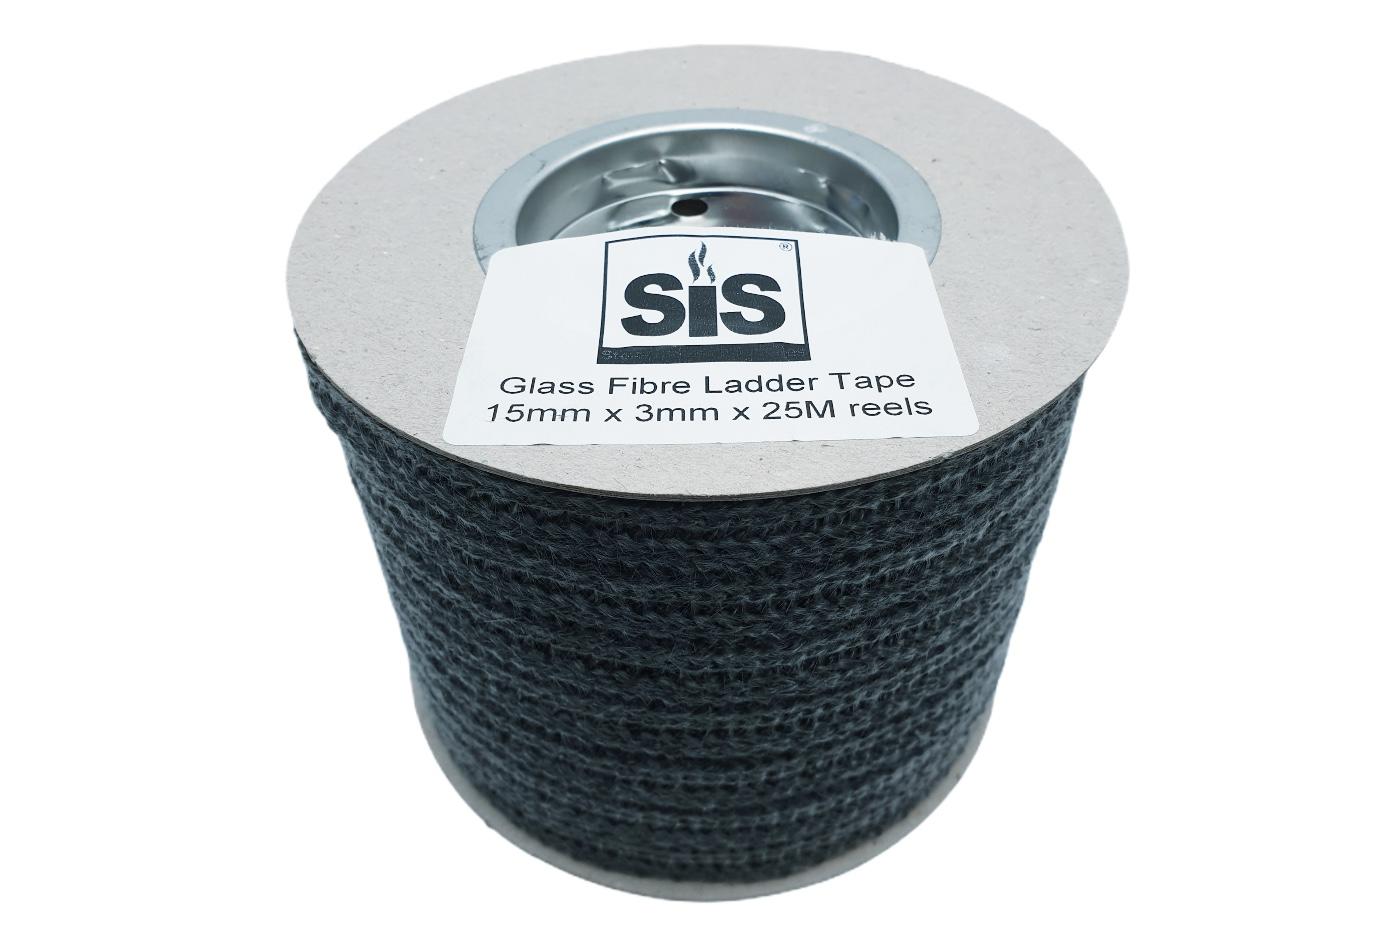 A 25 metre reel of 25mm x 3mm Self-Adhesive Backed Flat Rope Tape